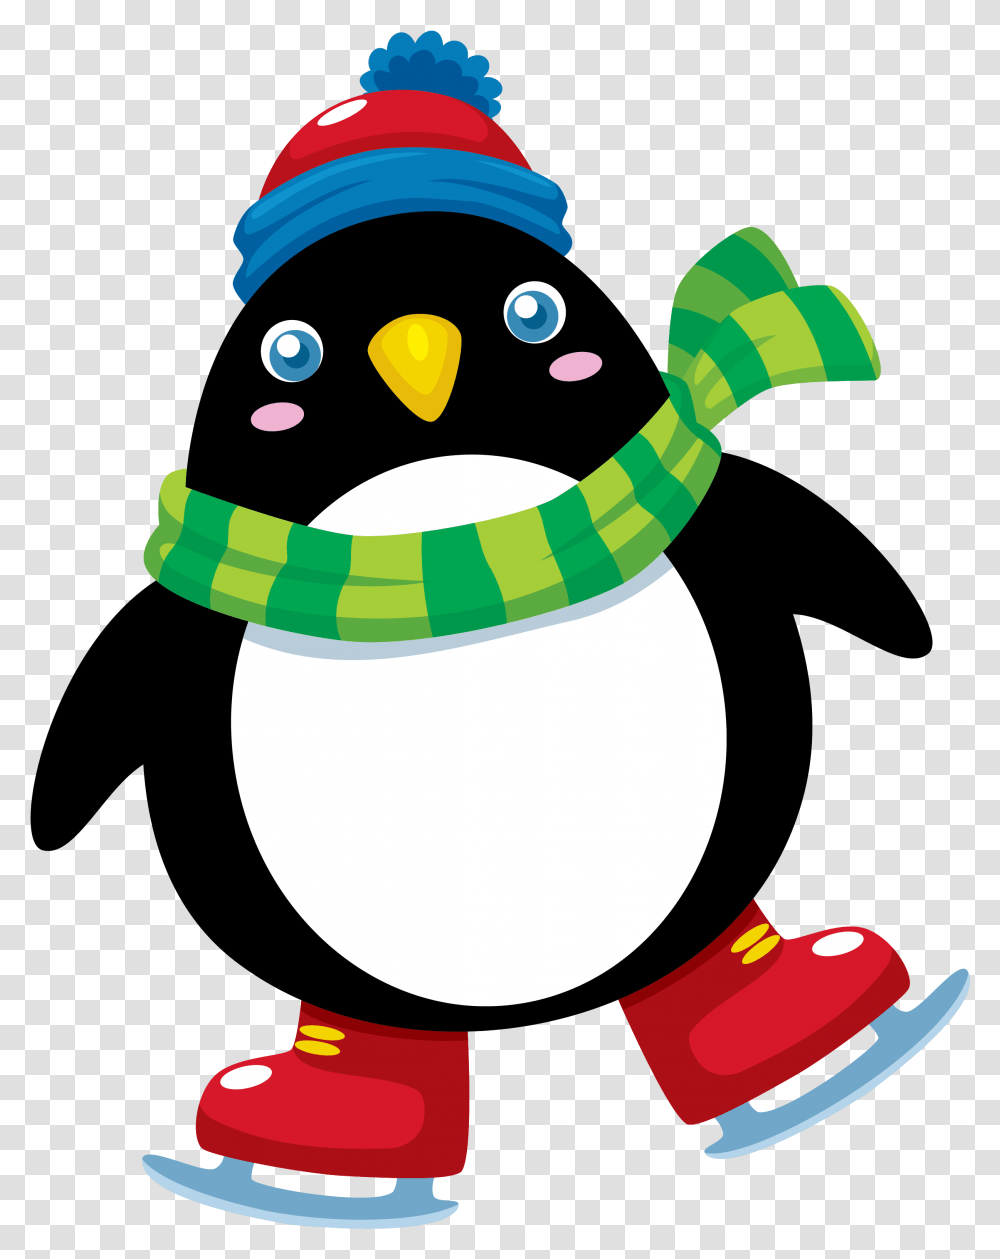 Penguin On Ice Skates, Angry Birds, Snowman, Winter, Outdoors Transparent Png